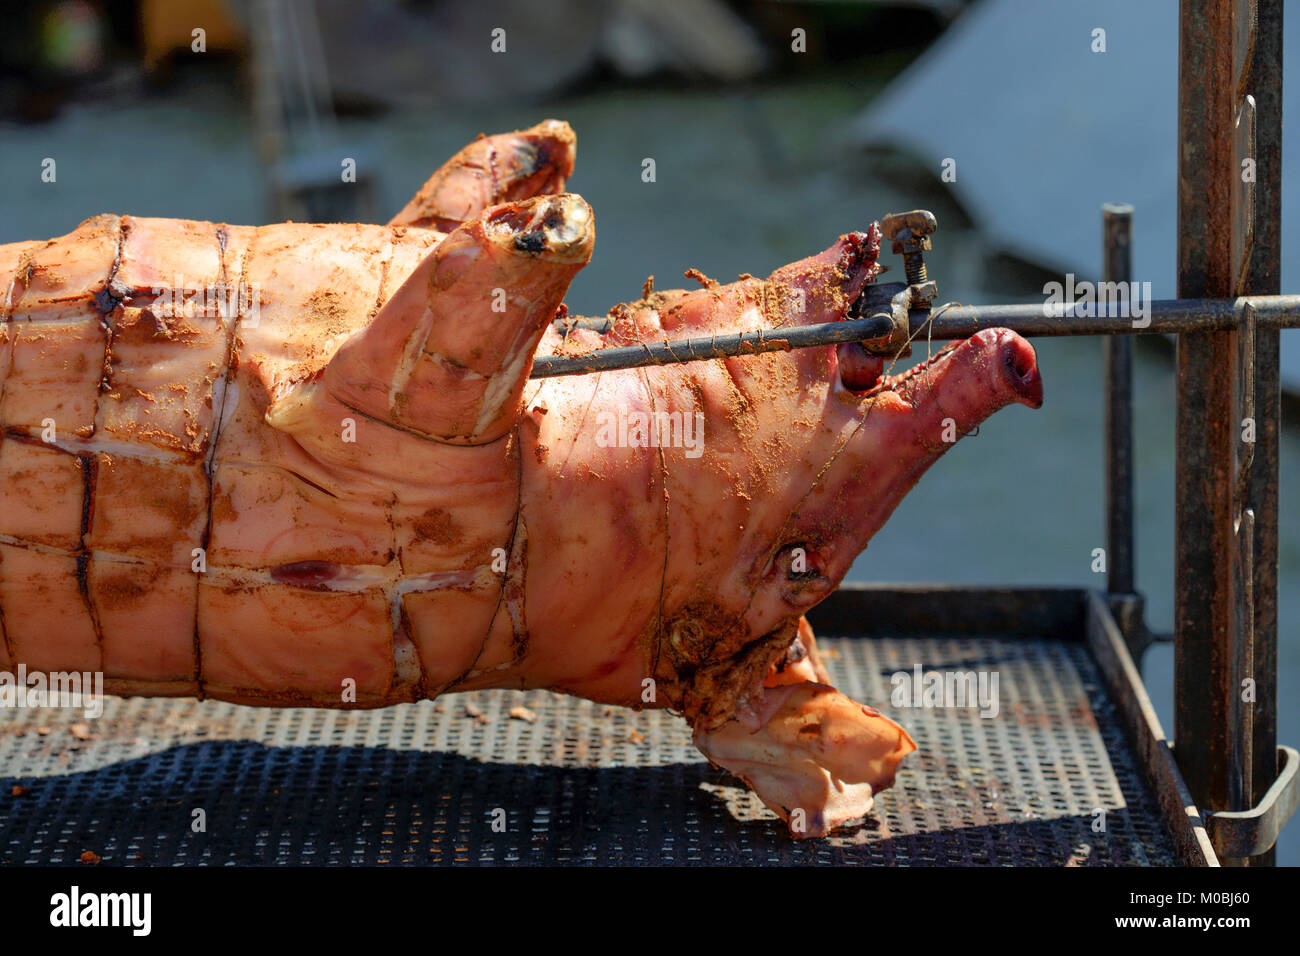 Medieval Festival: Roasted pig at the spit on an open fire Stock Photo